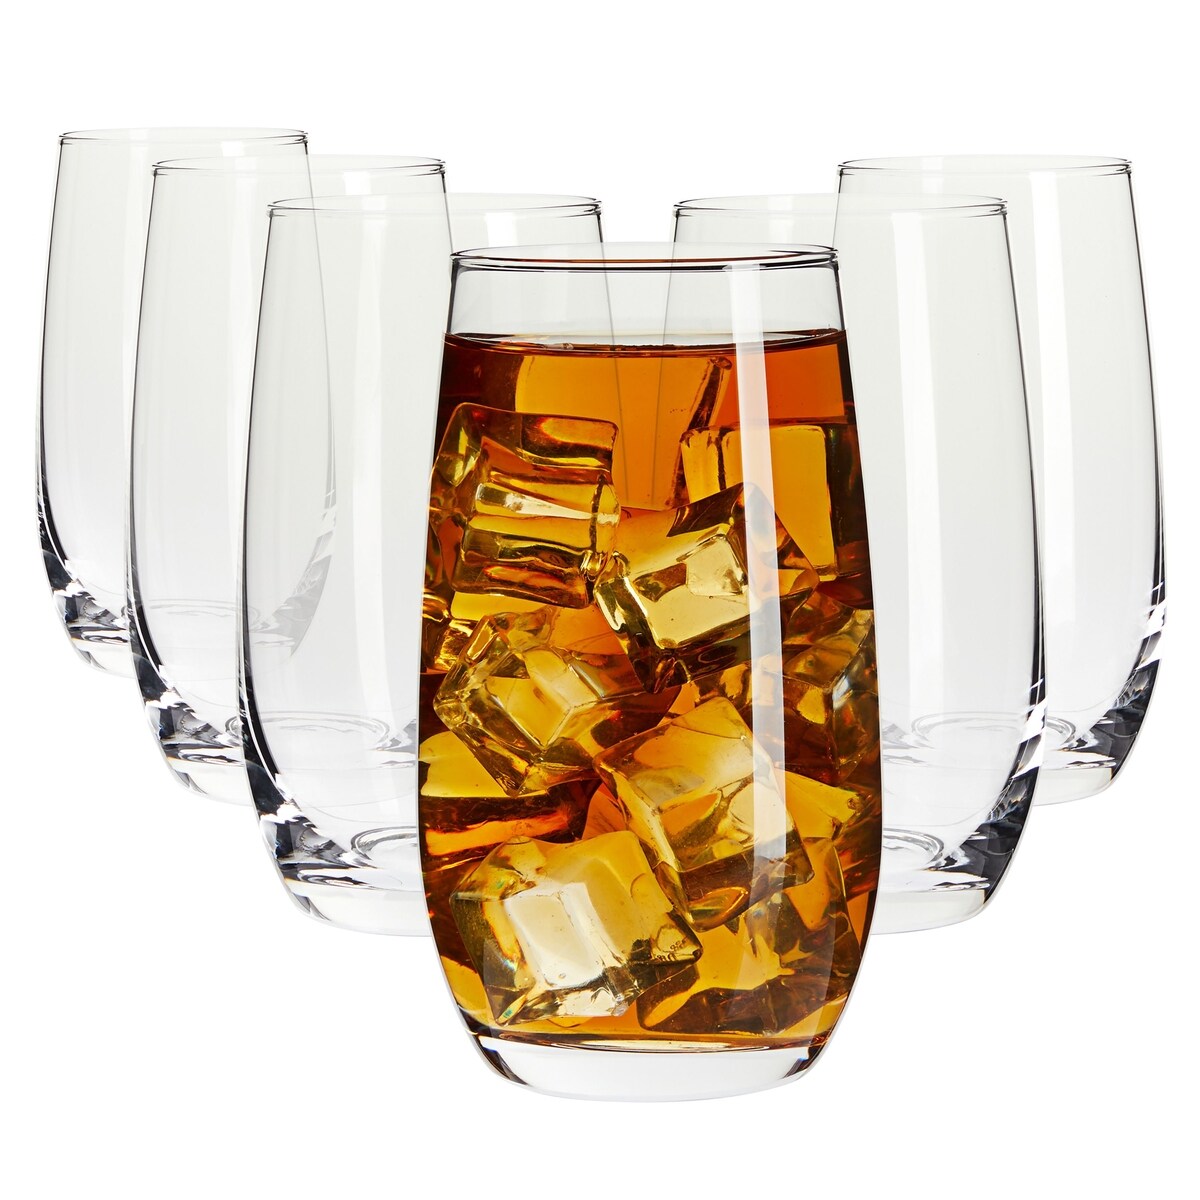 12oz Clear Highball Glasses Set of 6 for Beer, Juice, Mixed Drinks